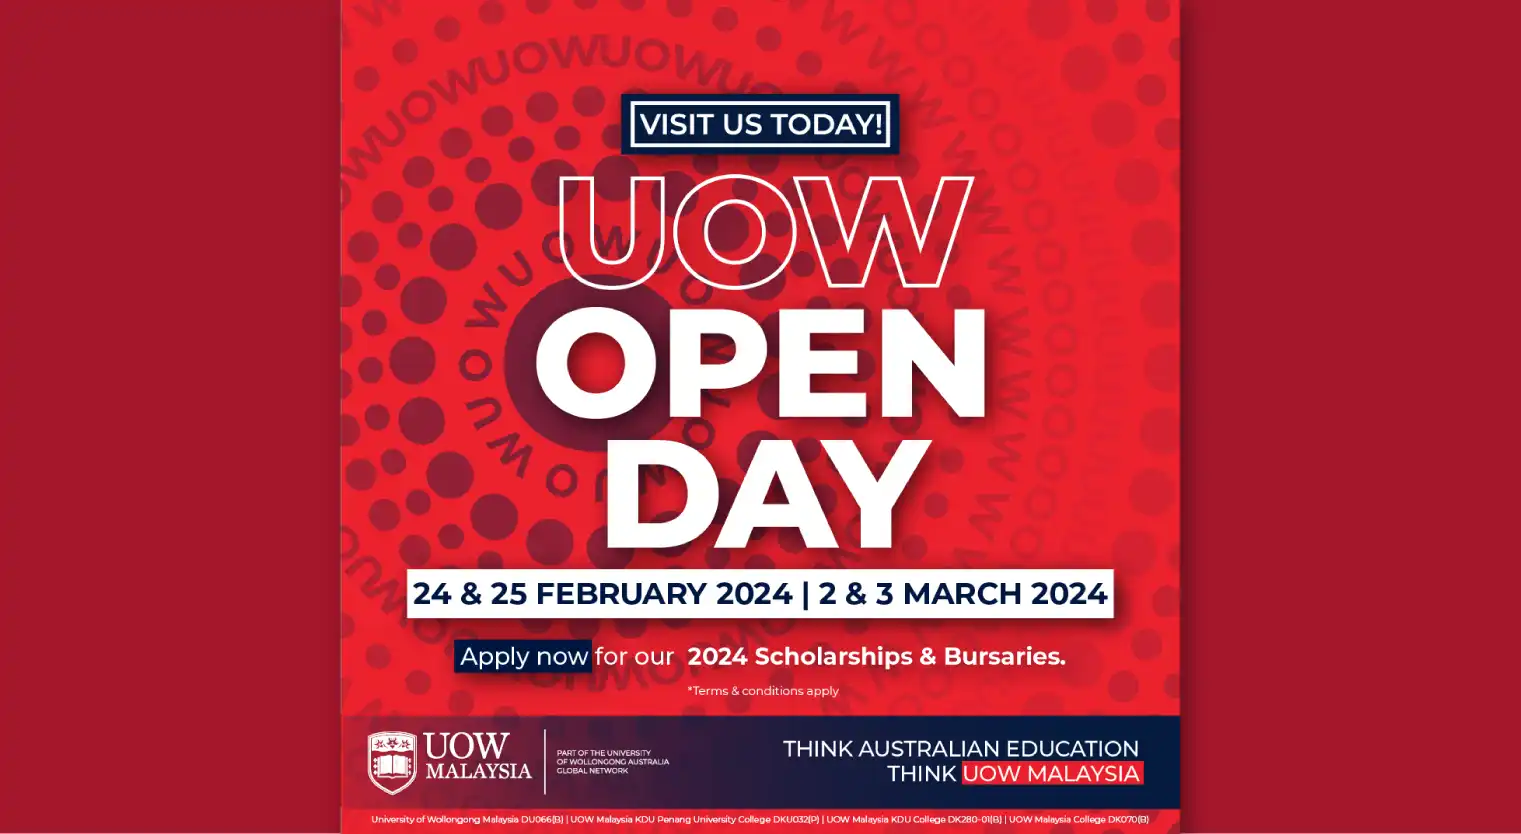 uow-malaysia-open-day-march-2024